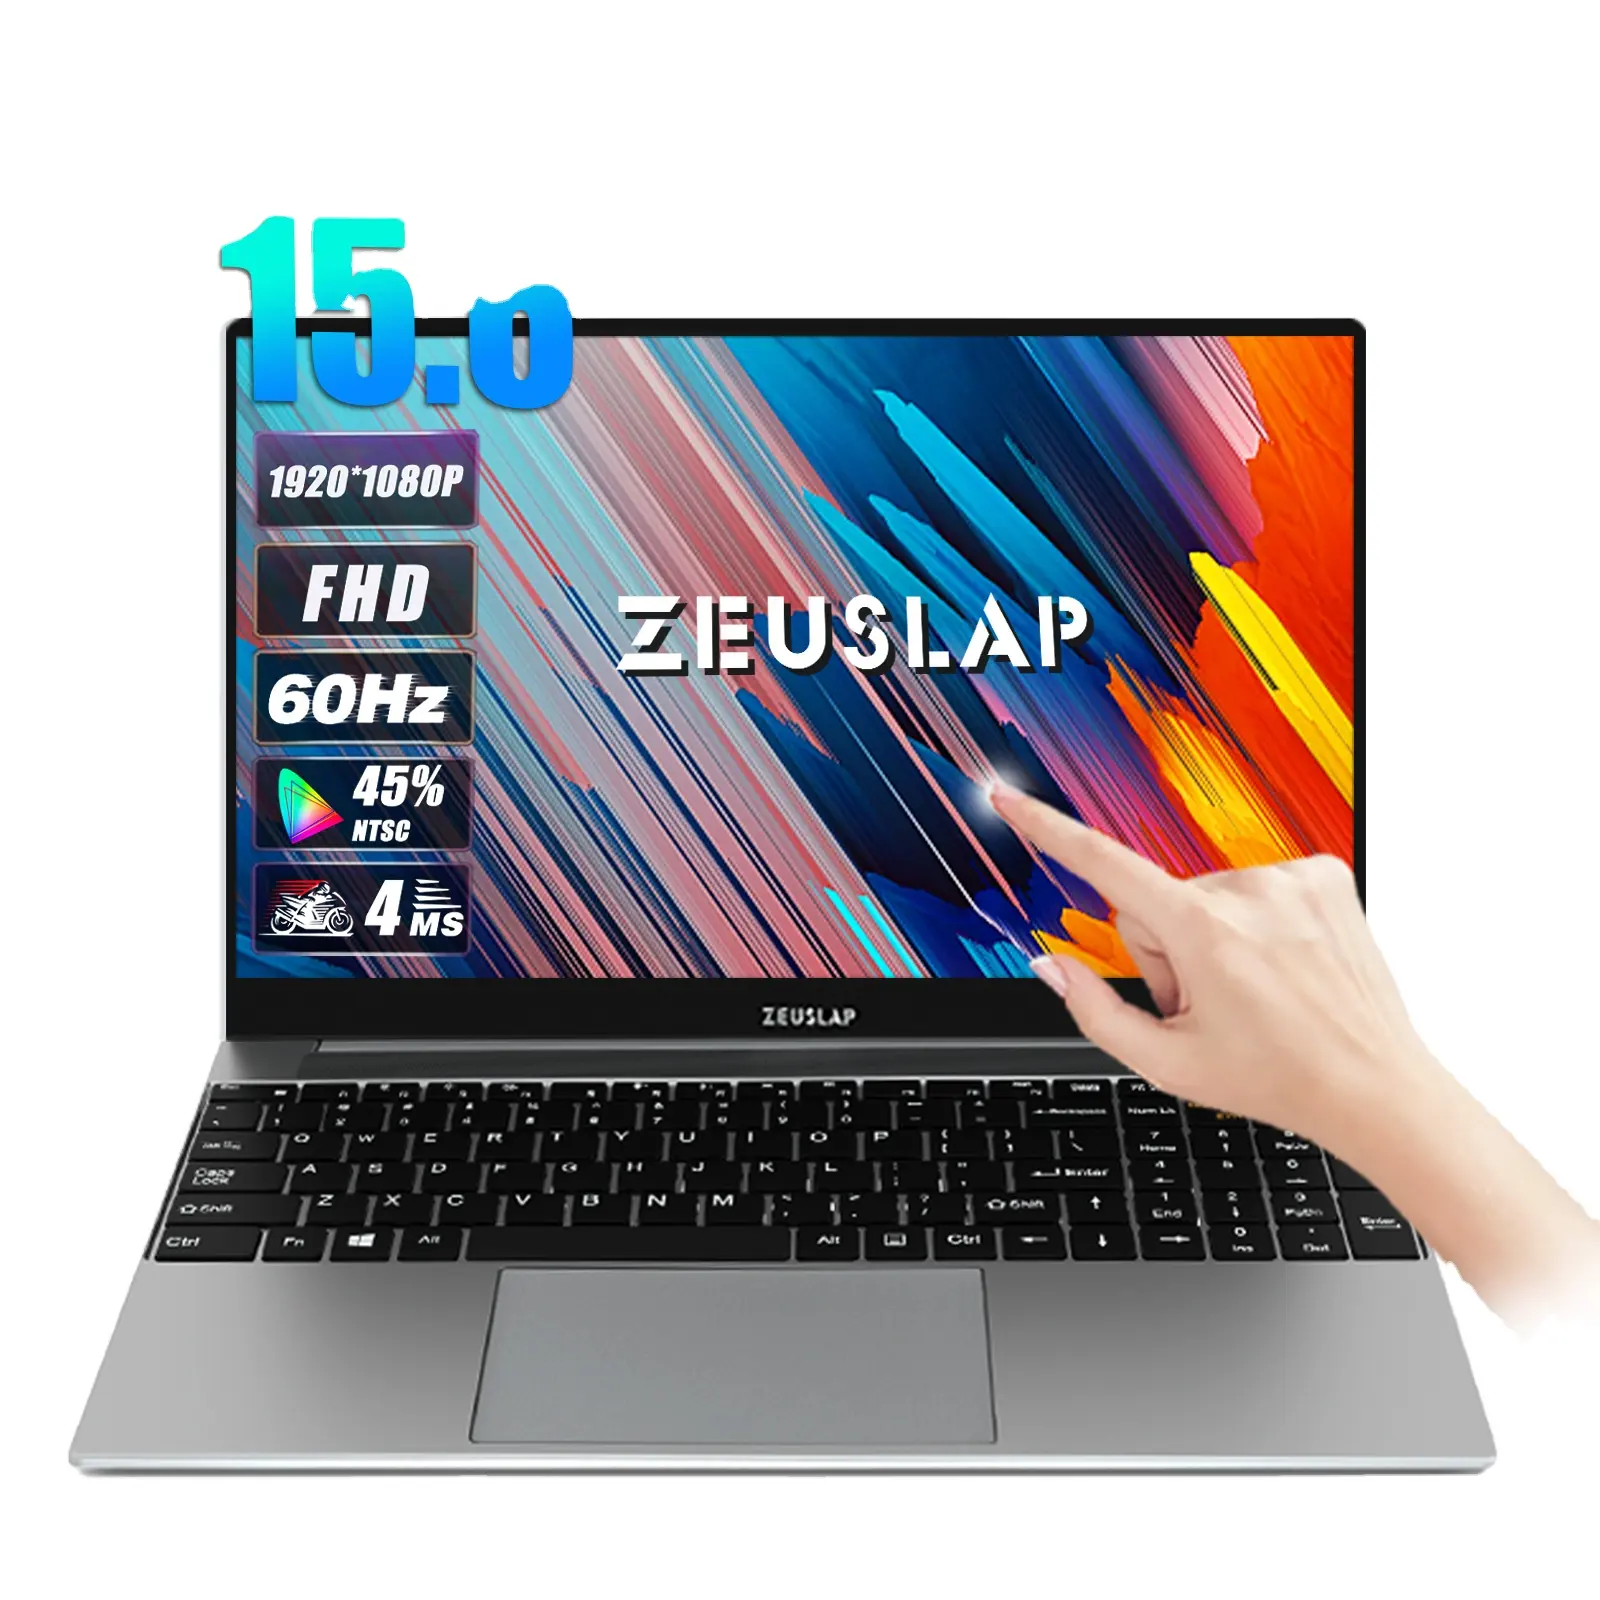 ZEUSLAP 15.6 Inch Full HD Portable Monitor Built-in Keyboard and Mouse For Raspberry Pi Samsung DEX MacBook Pro Laptop